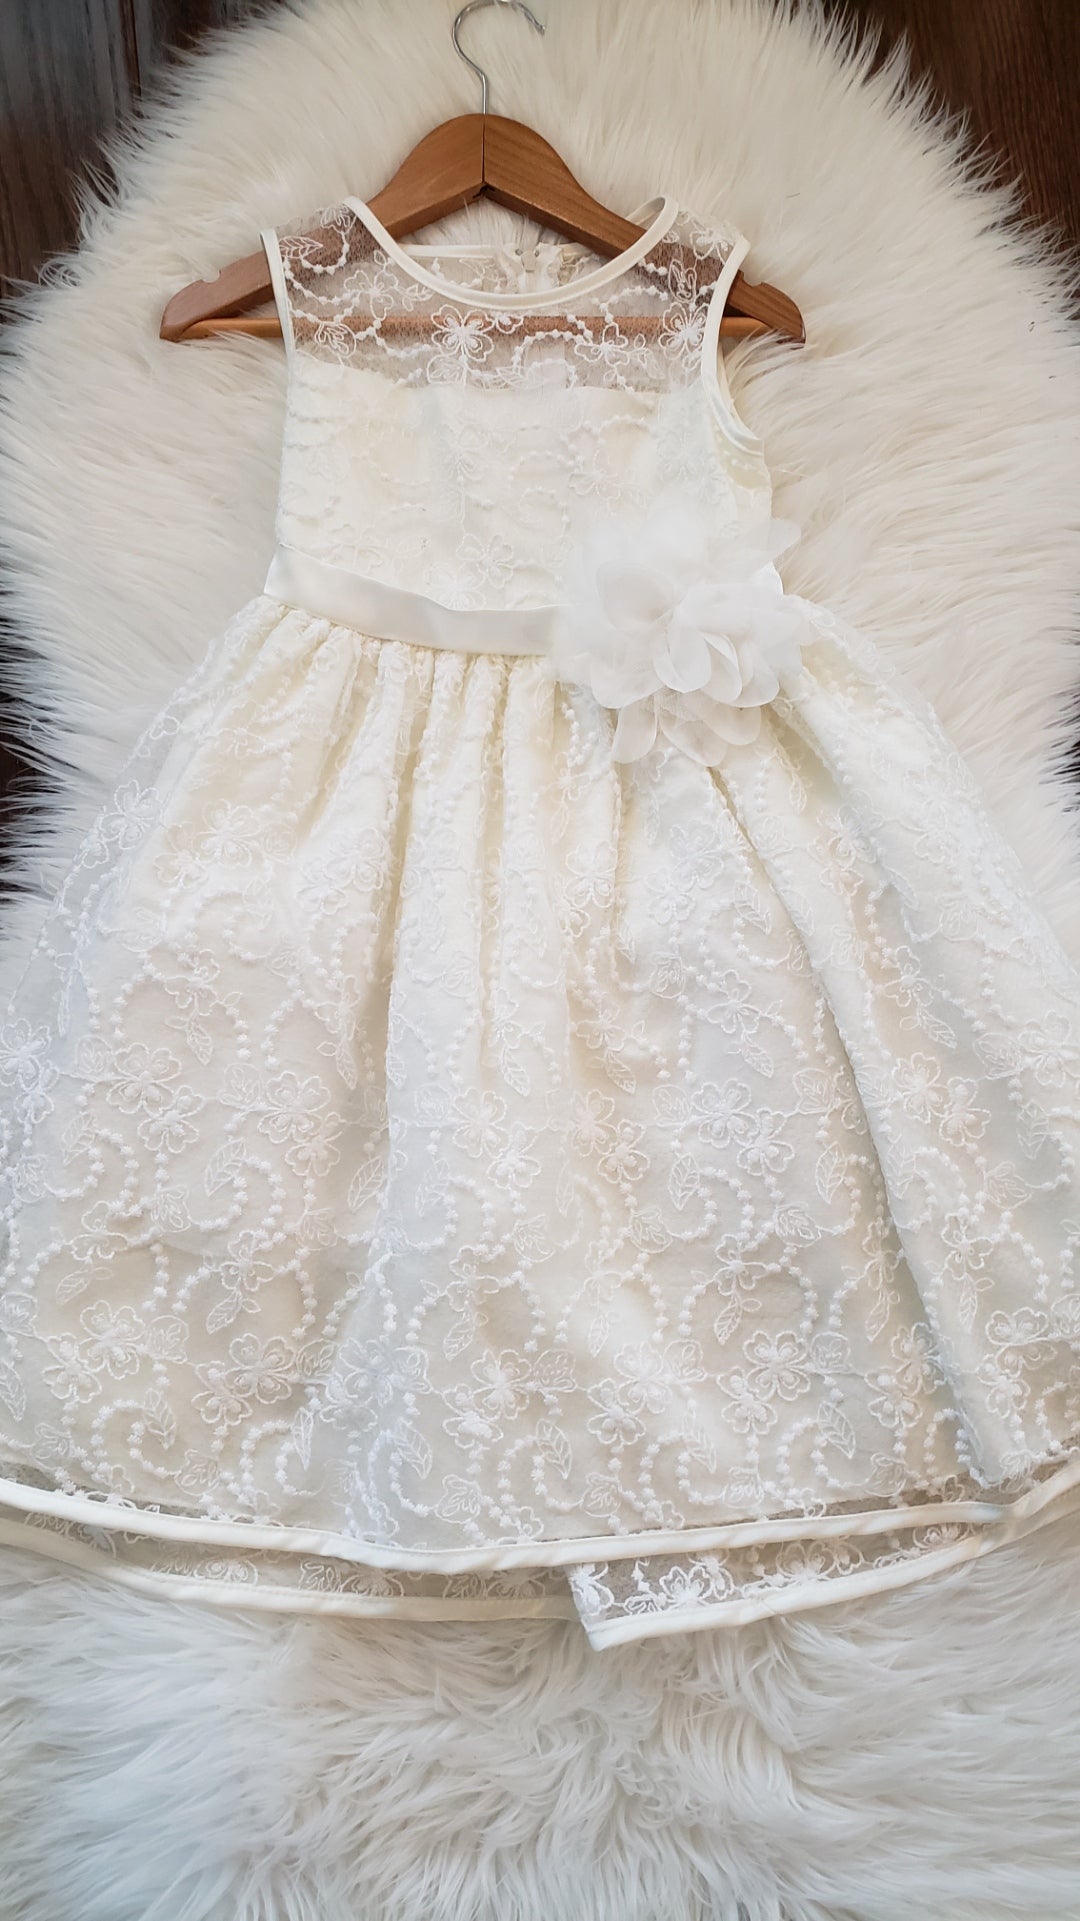 Lace and Floral Baptismal Dress